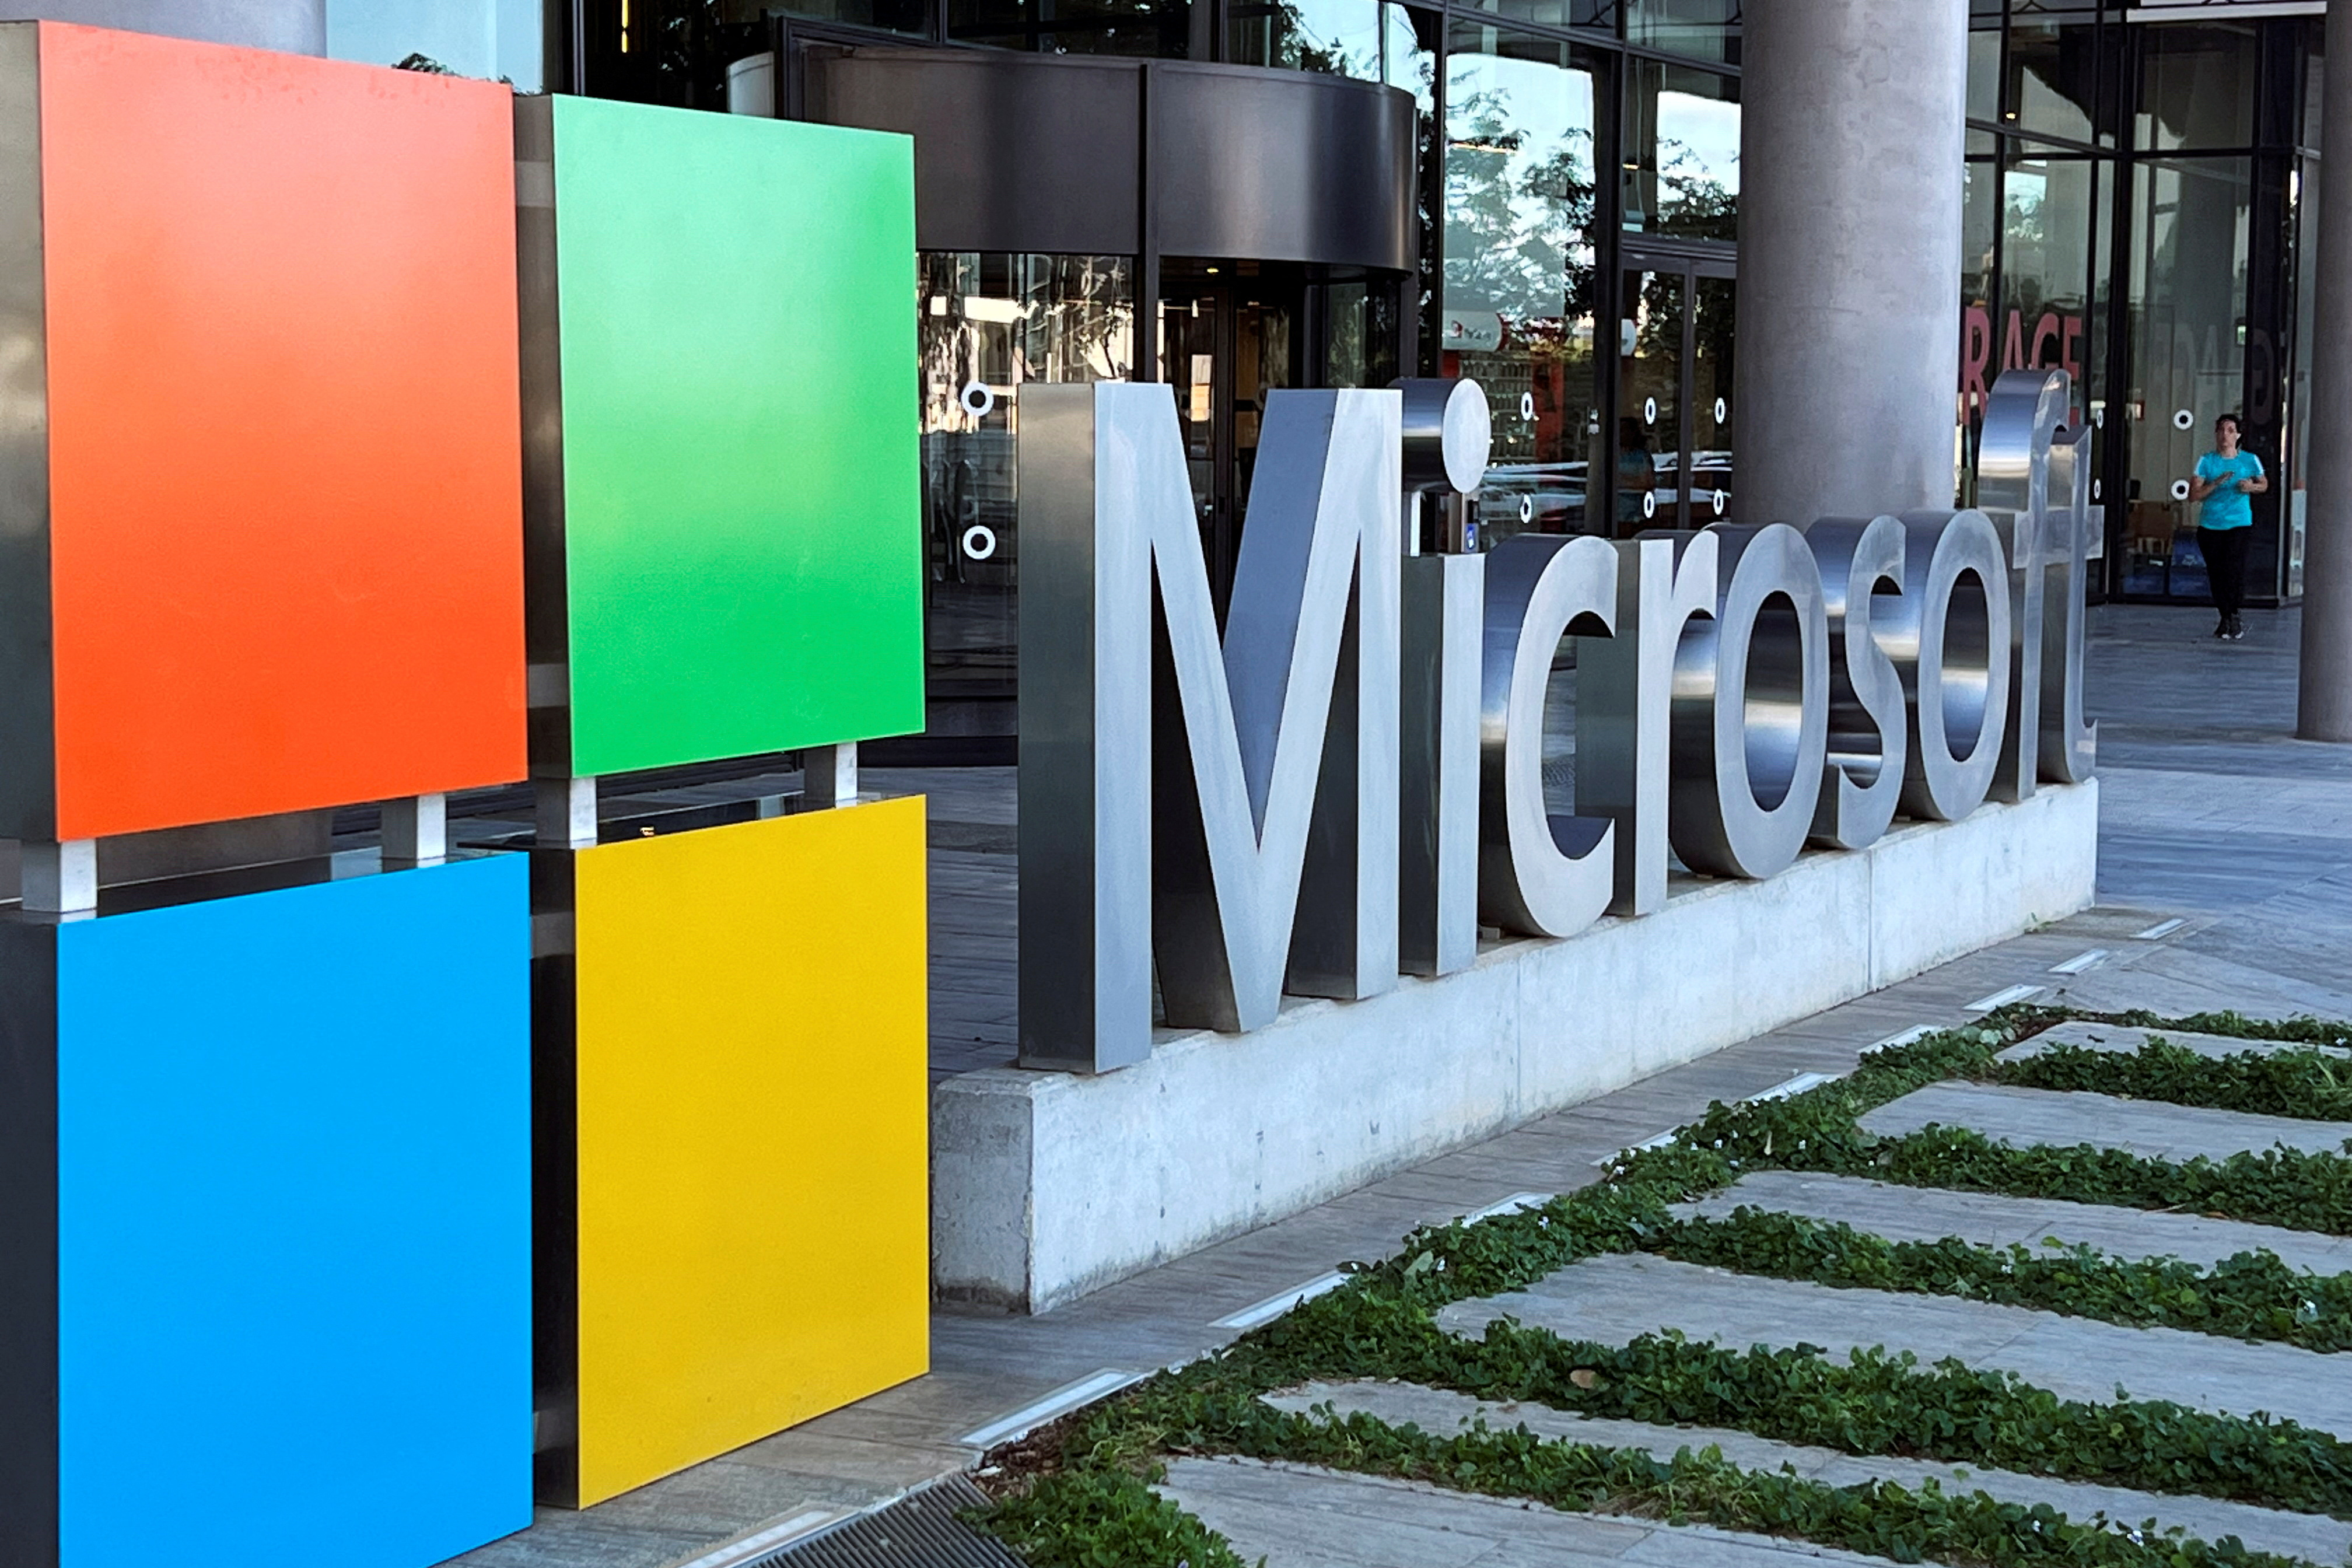 Microsoft announces $52.7 billion in Q2 revenue amid plans to layoff 10,000 workers